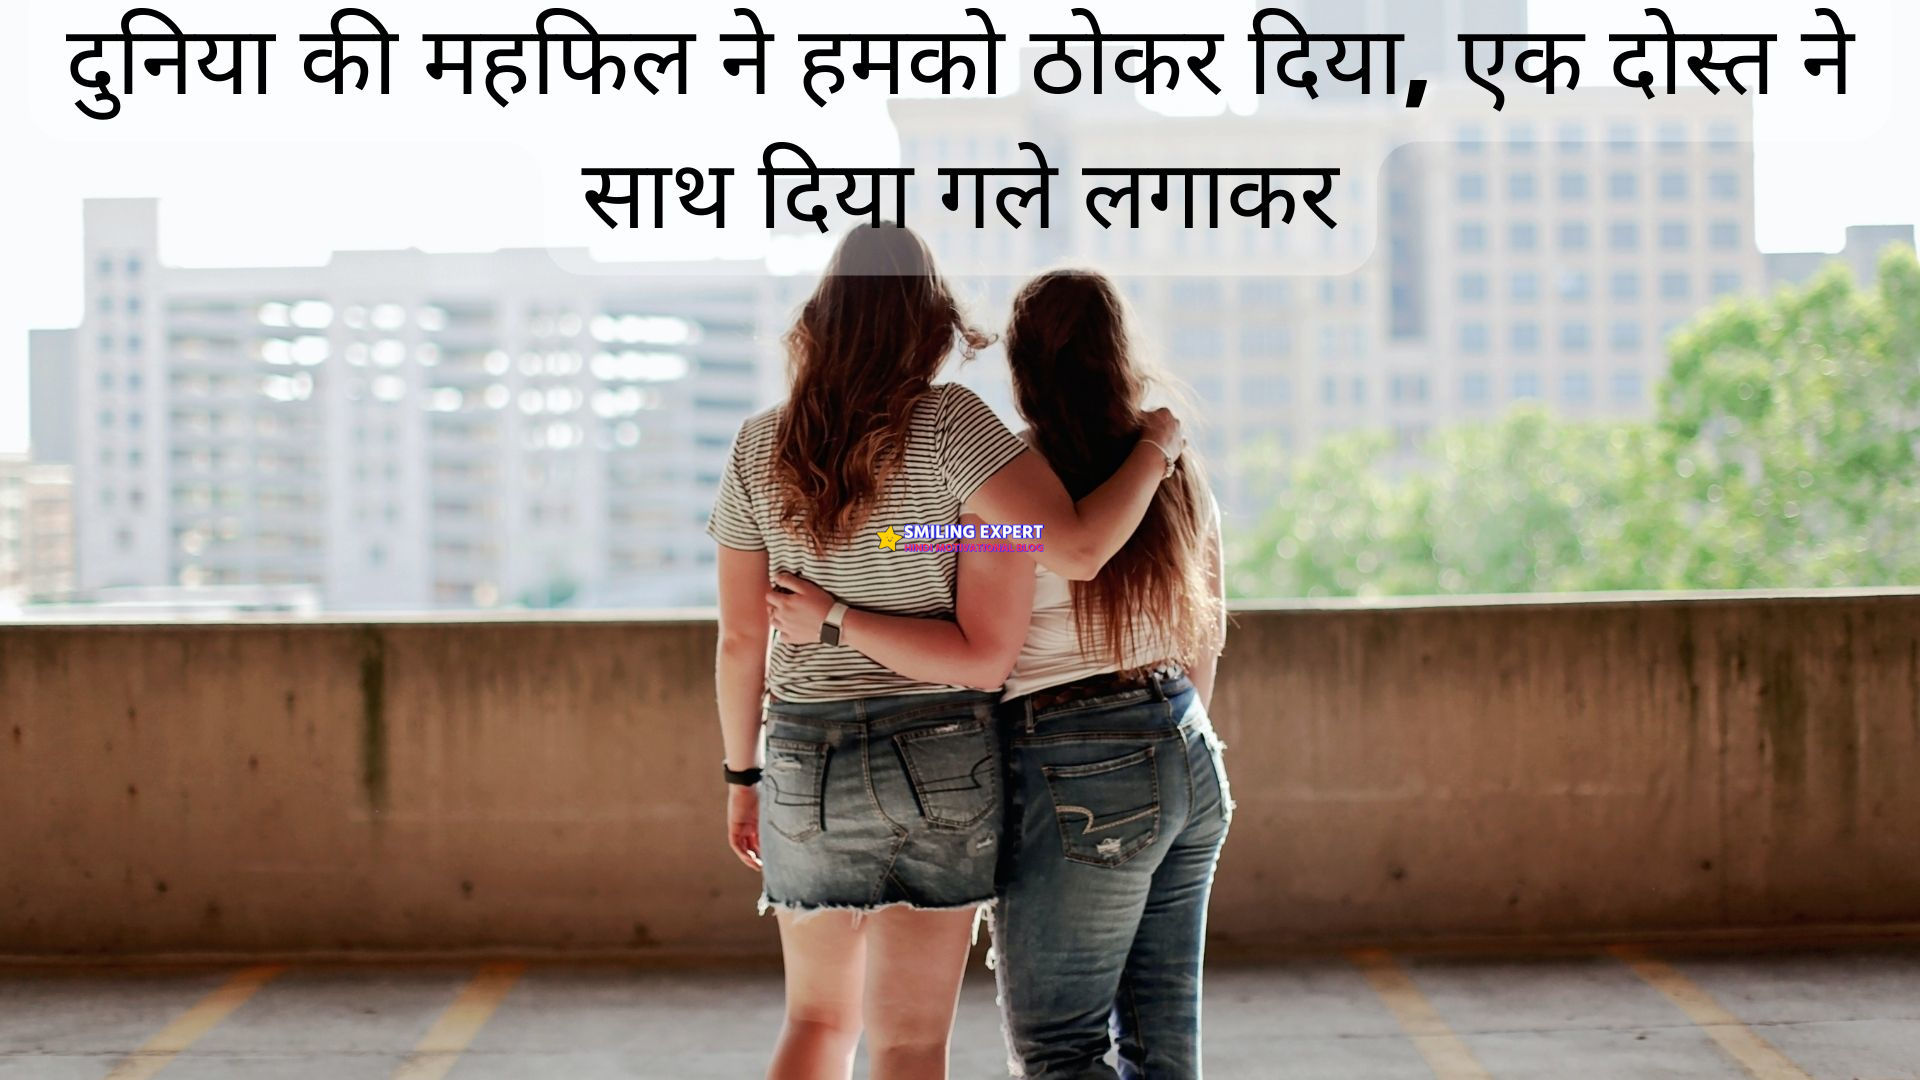 best friend quote in hindi